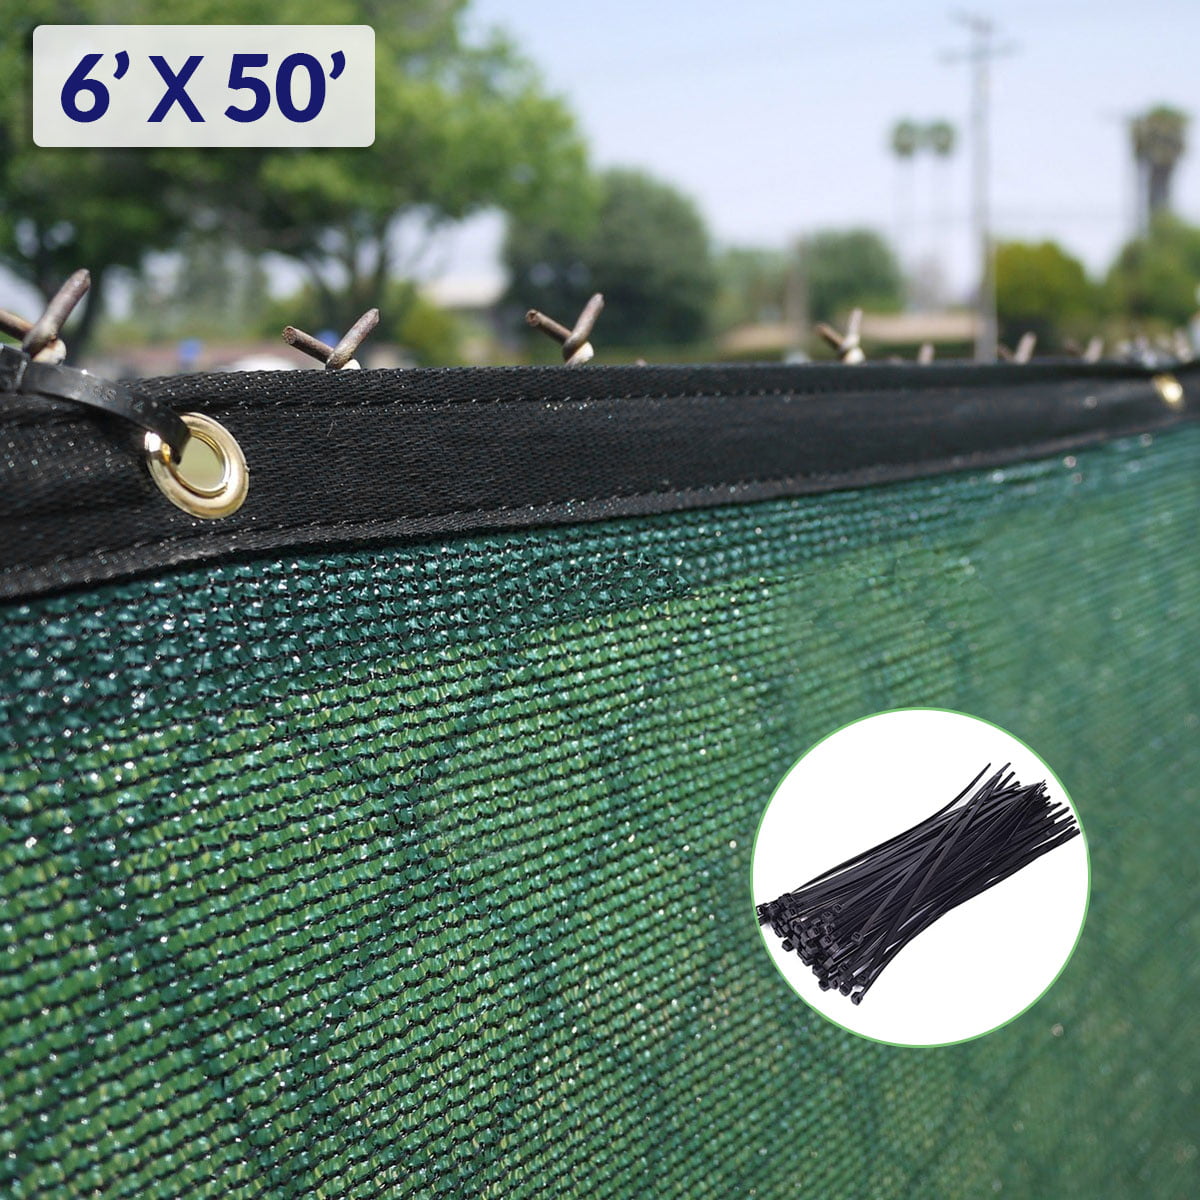 Clevr Privacy 6' x 50' Green Fence Screen With Mesh Fabric Windscreen Shade